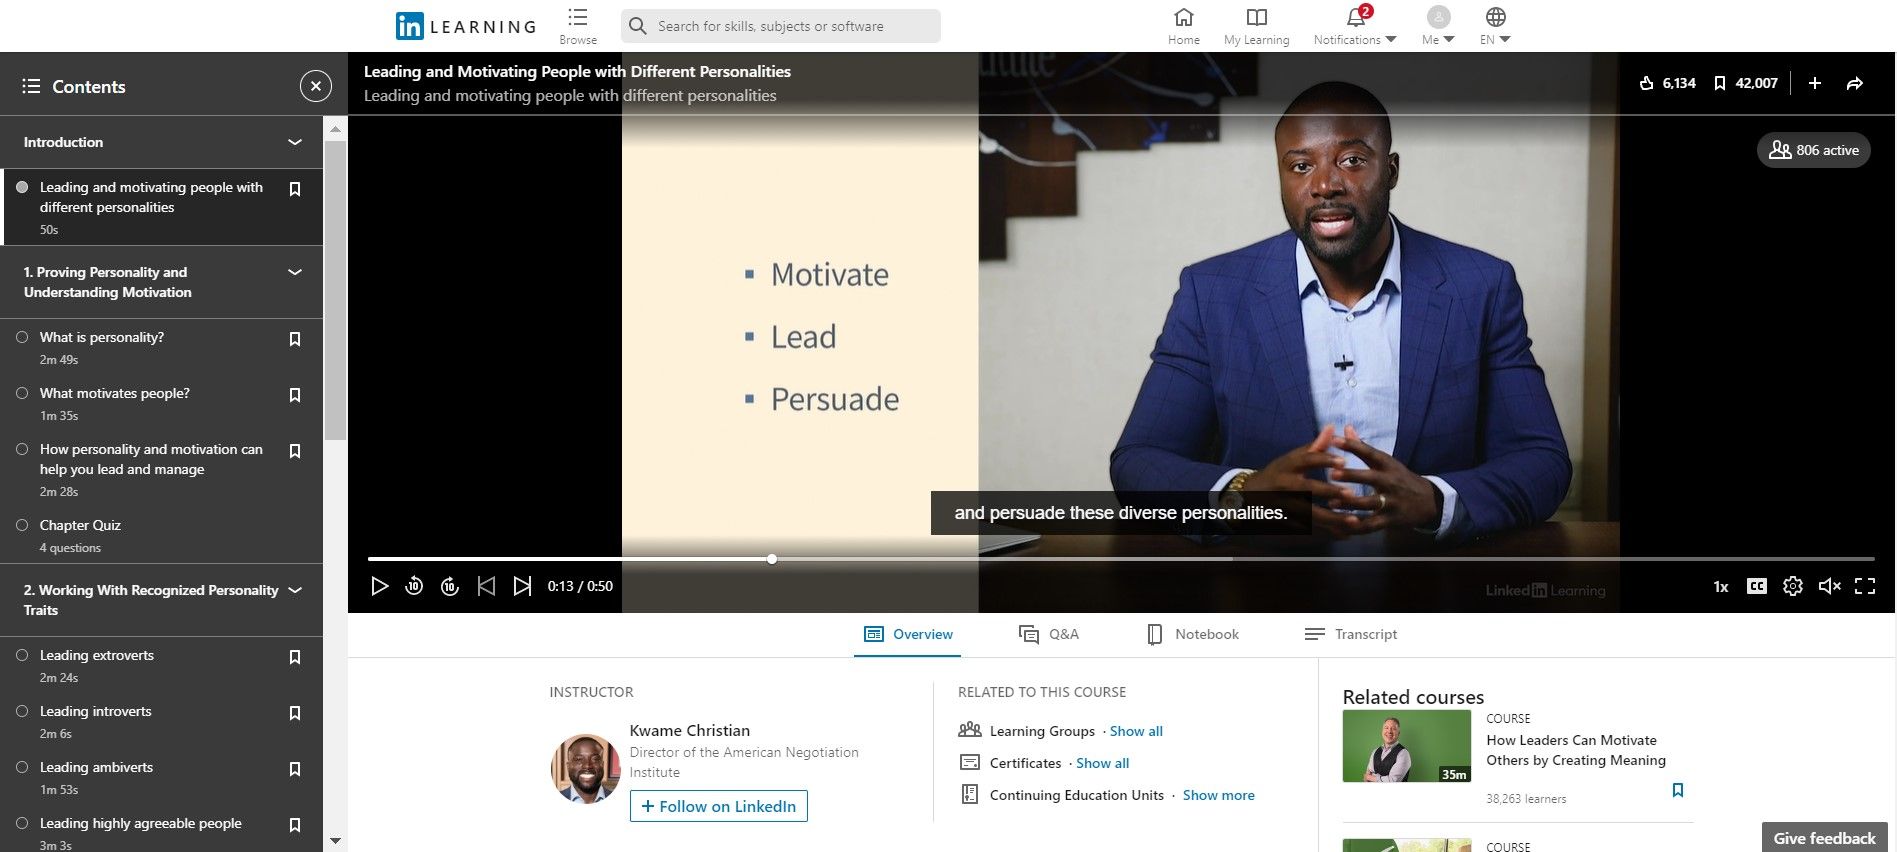 leading and motivating people with different personalities linkedin learning course